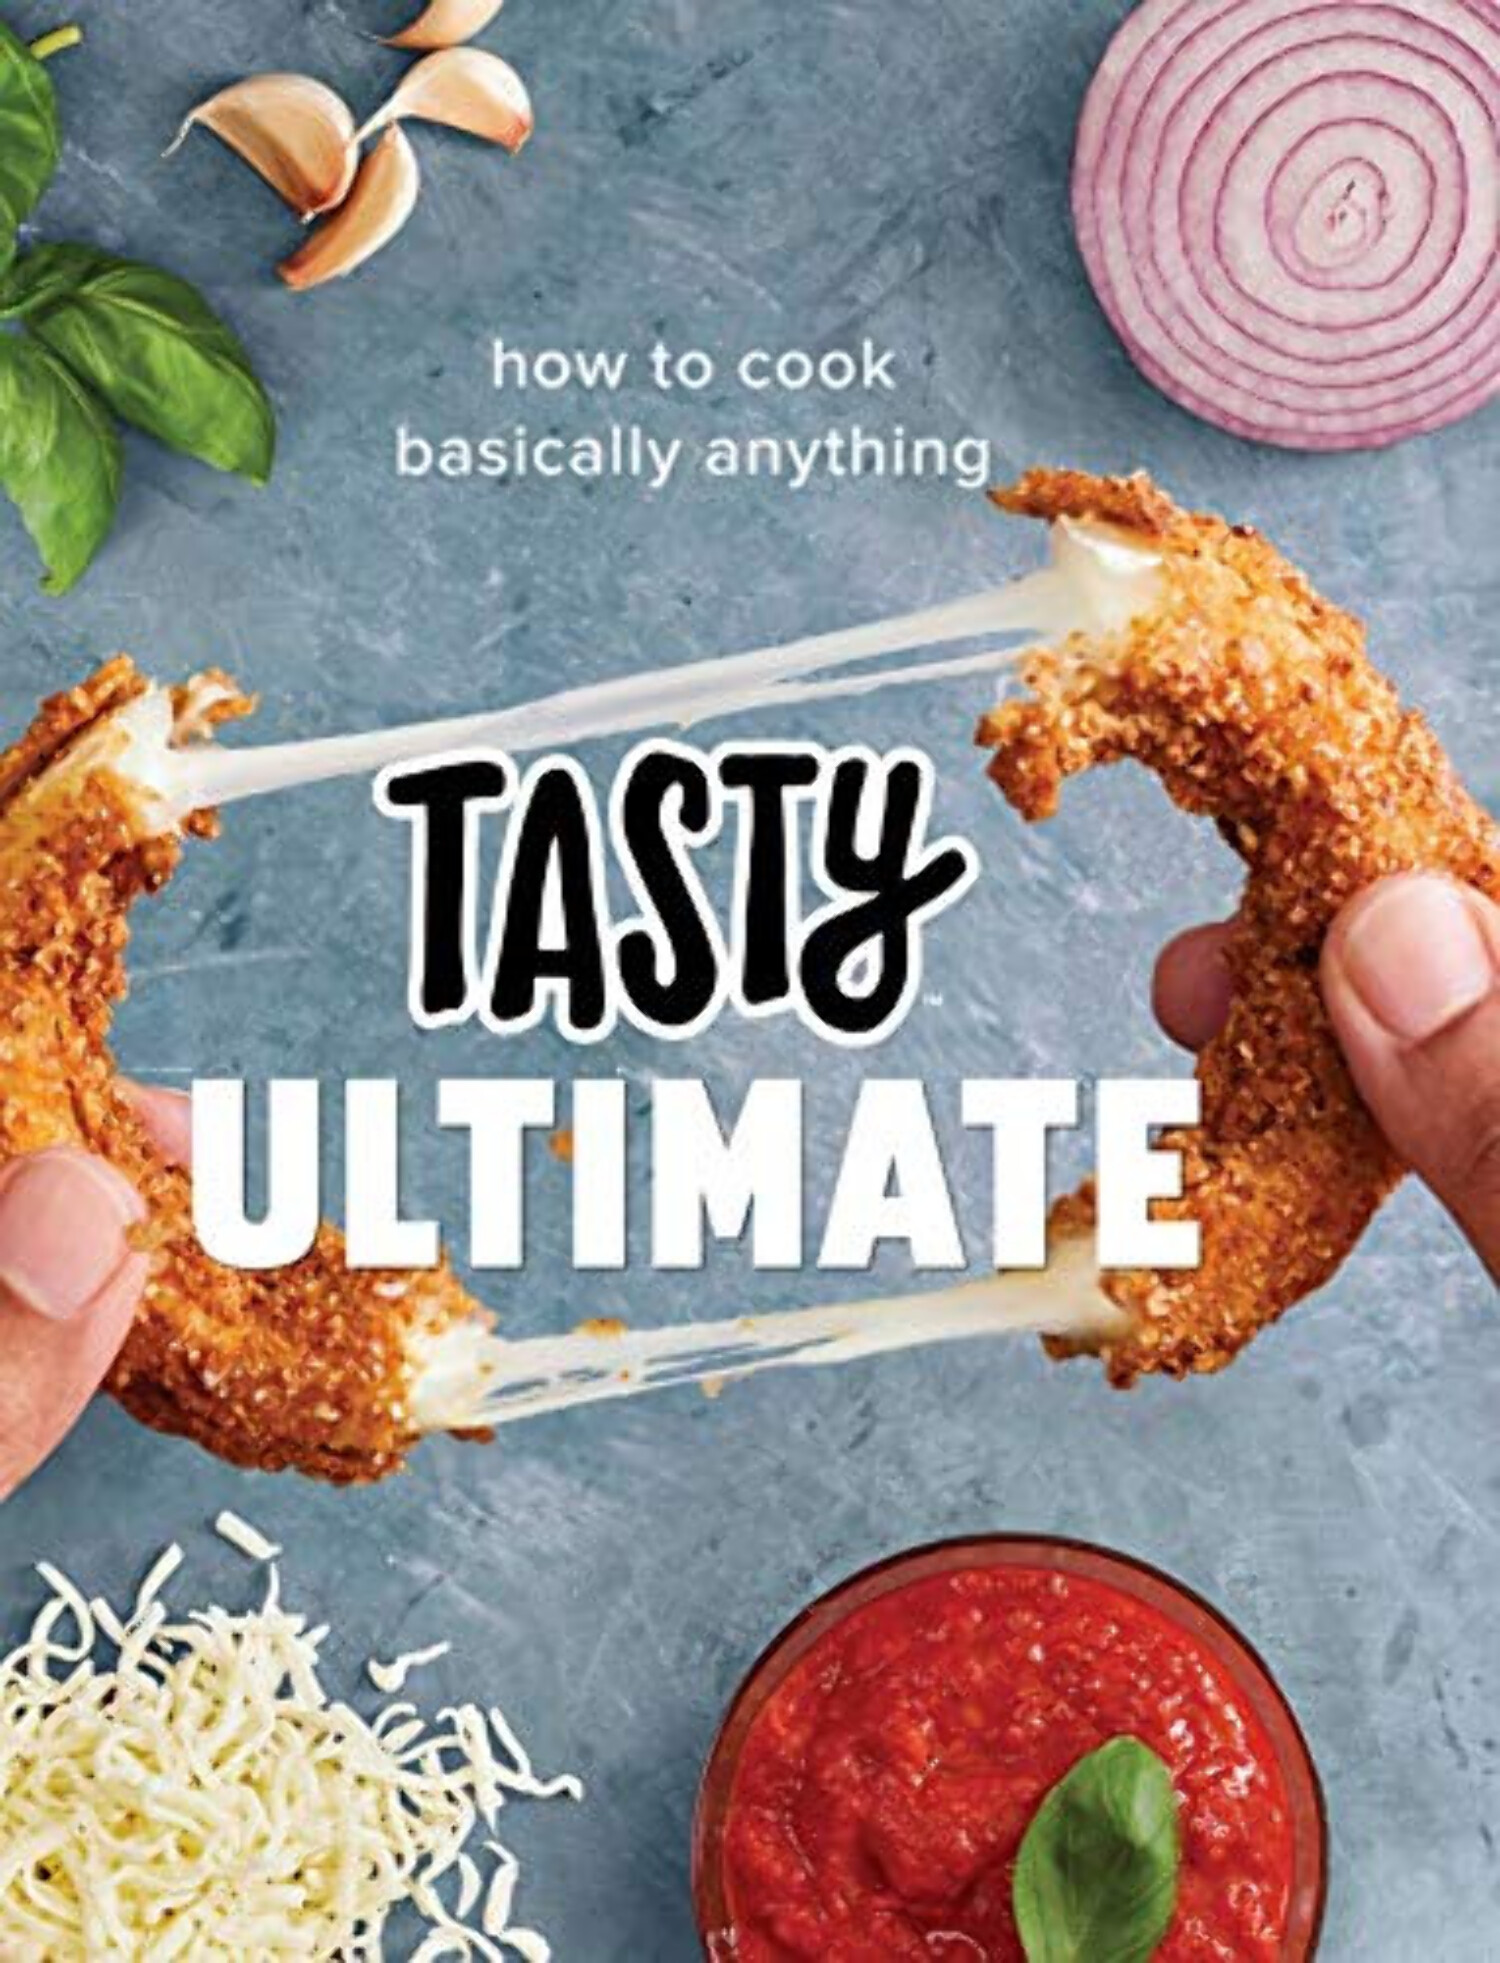 Tasty Ultimate: How to Cook Basically Anything (An Official Tasty Cookbook) - image 1 of 1